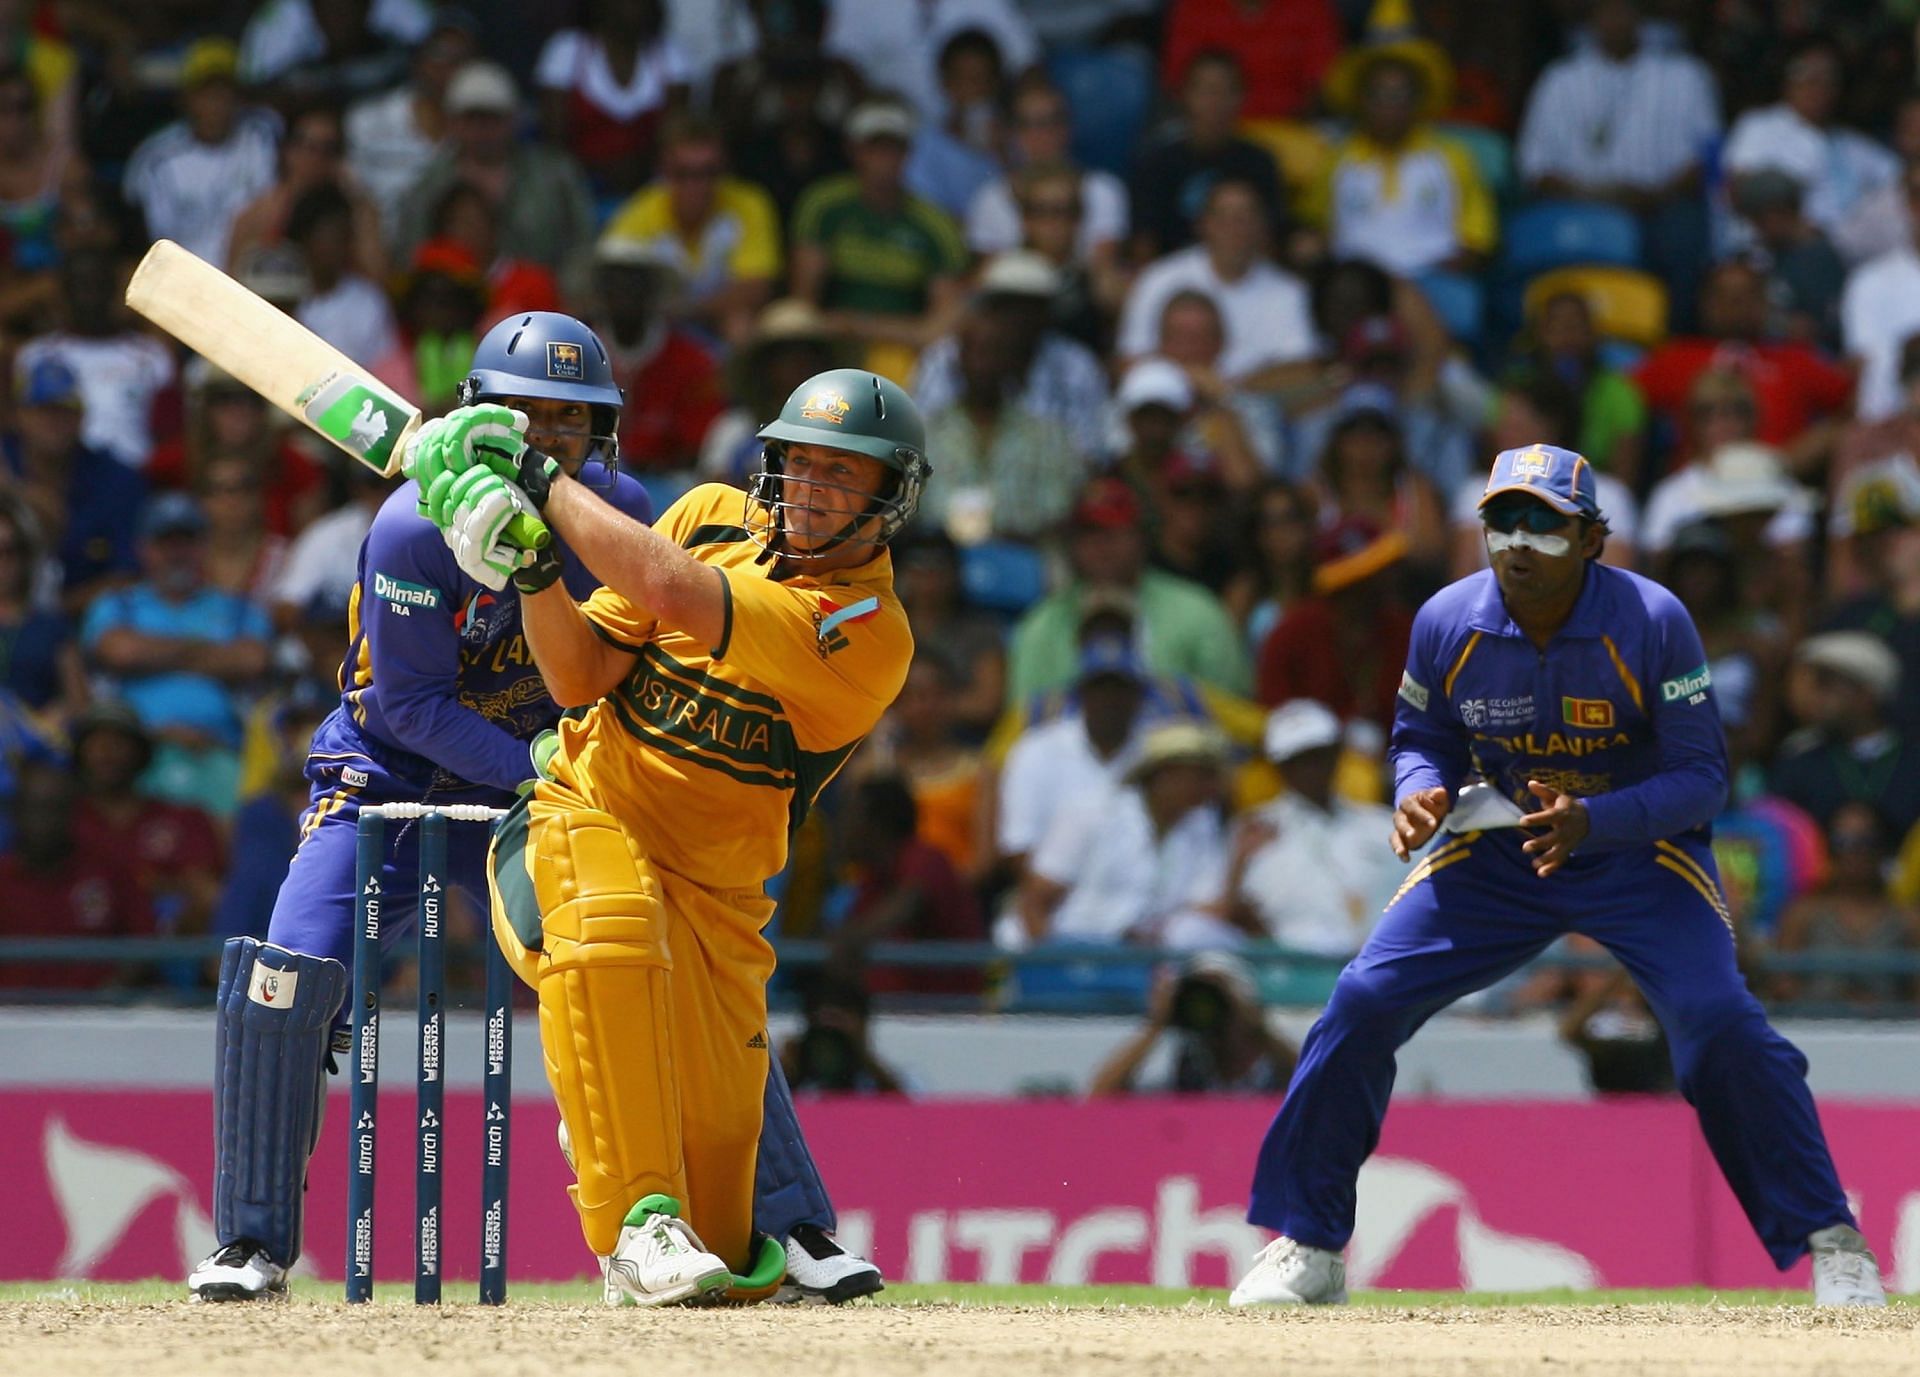 Adam Gilchrist scored 149 runs in the finals of the 2007 World Cup